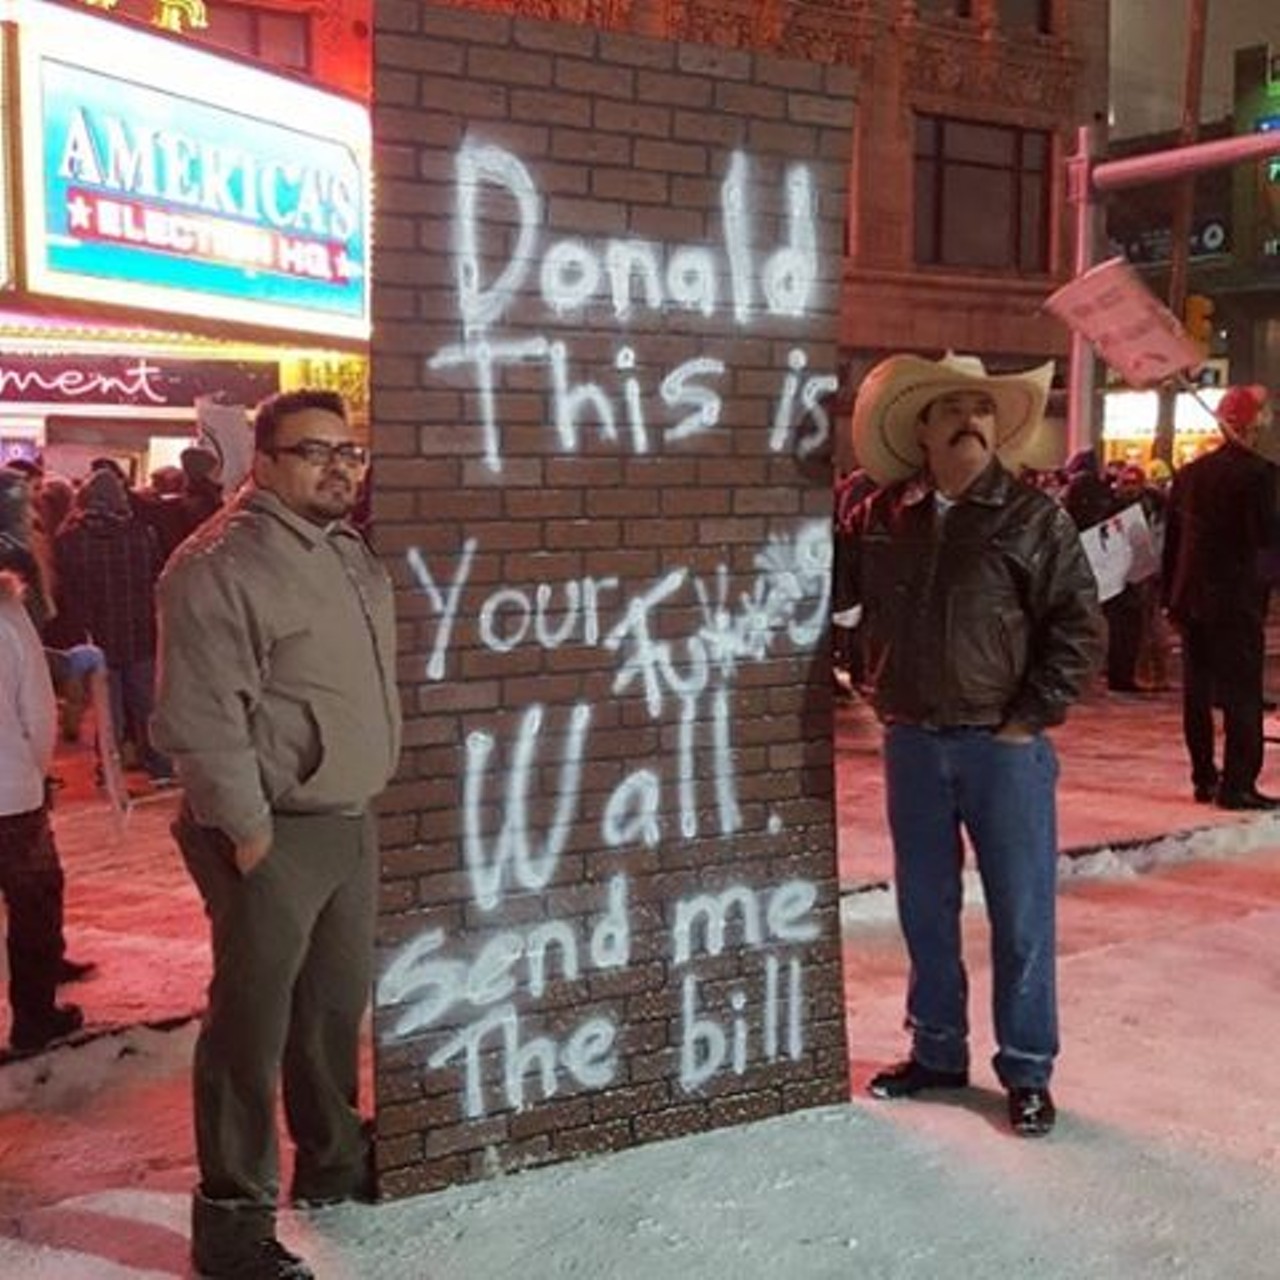 Protesters carry a wall with a message to the candidates, mocking Trump&#146;s promise to build a wall along the Mexican border. Photo via Instagram user @Live______Free